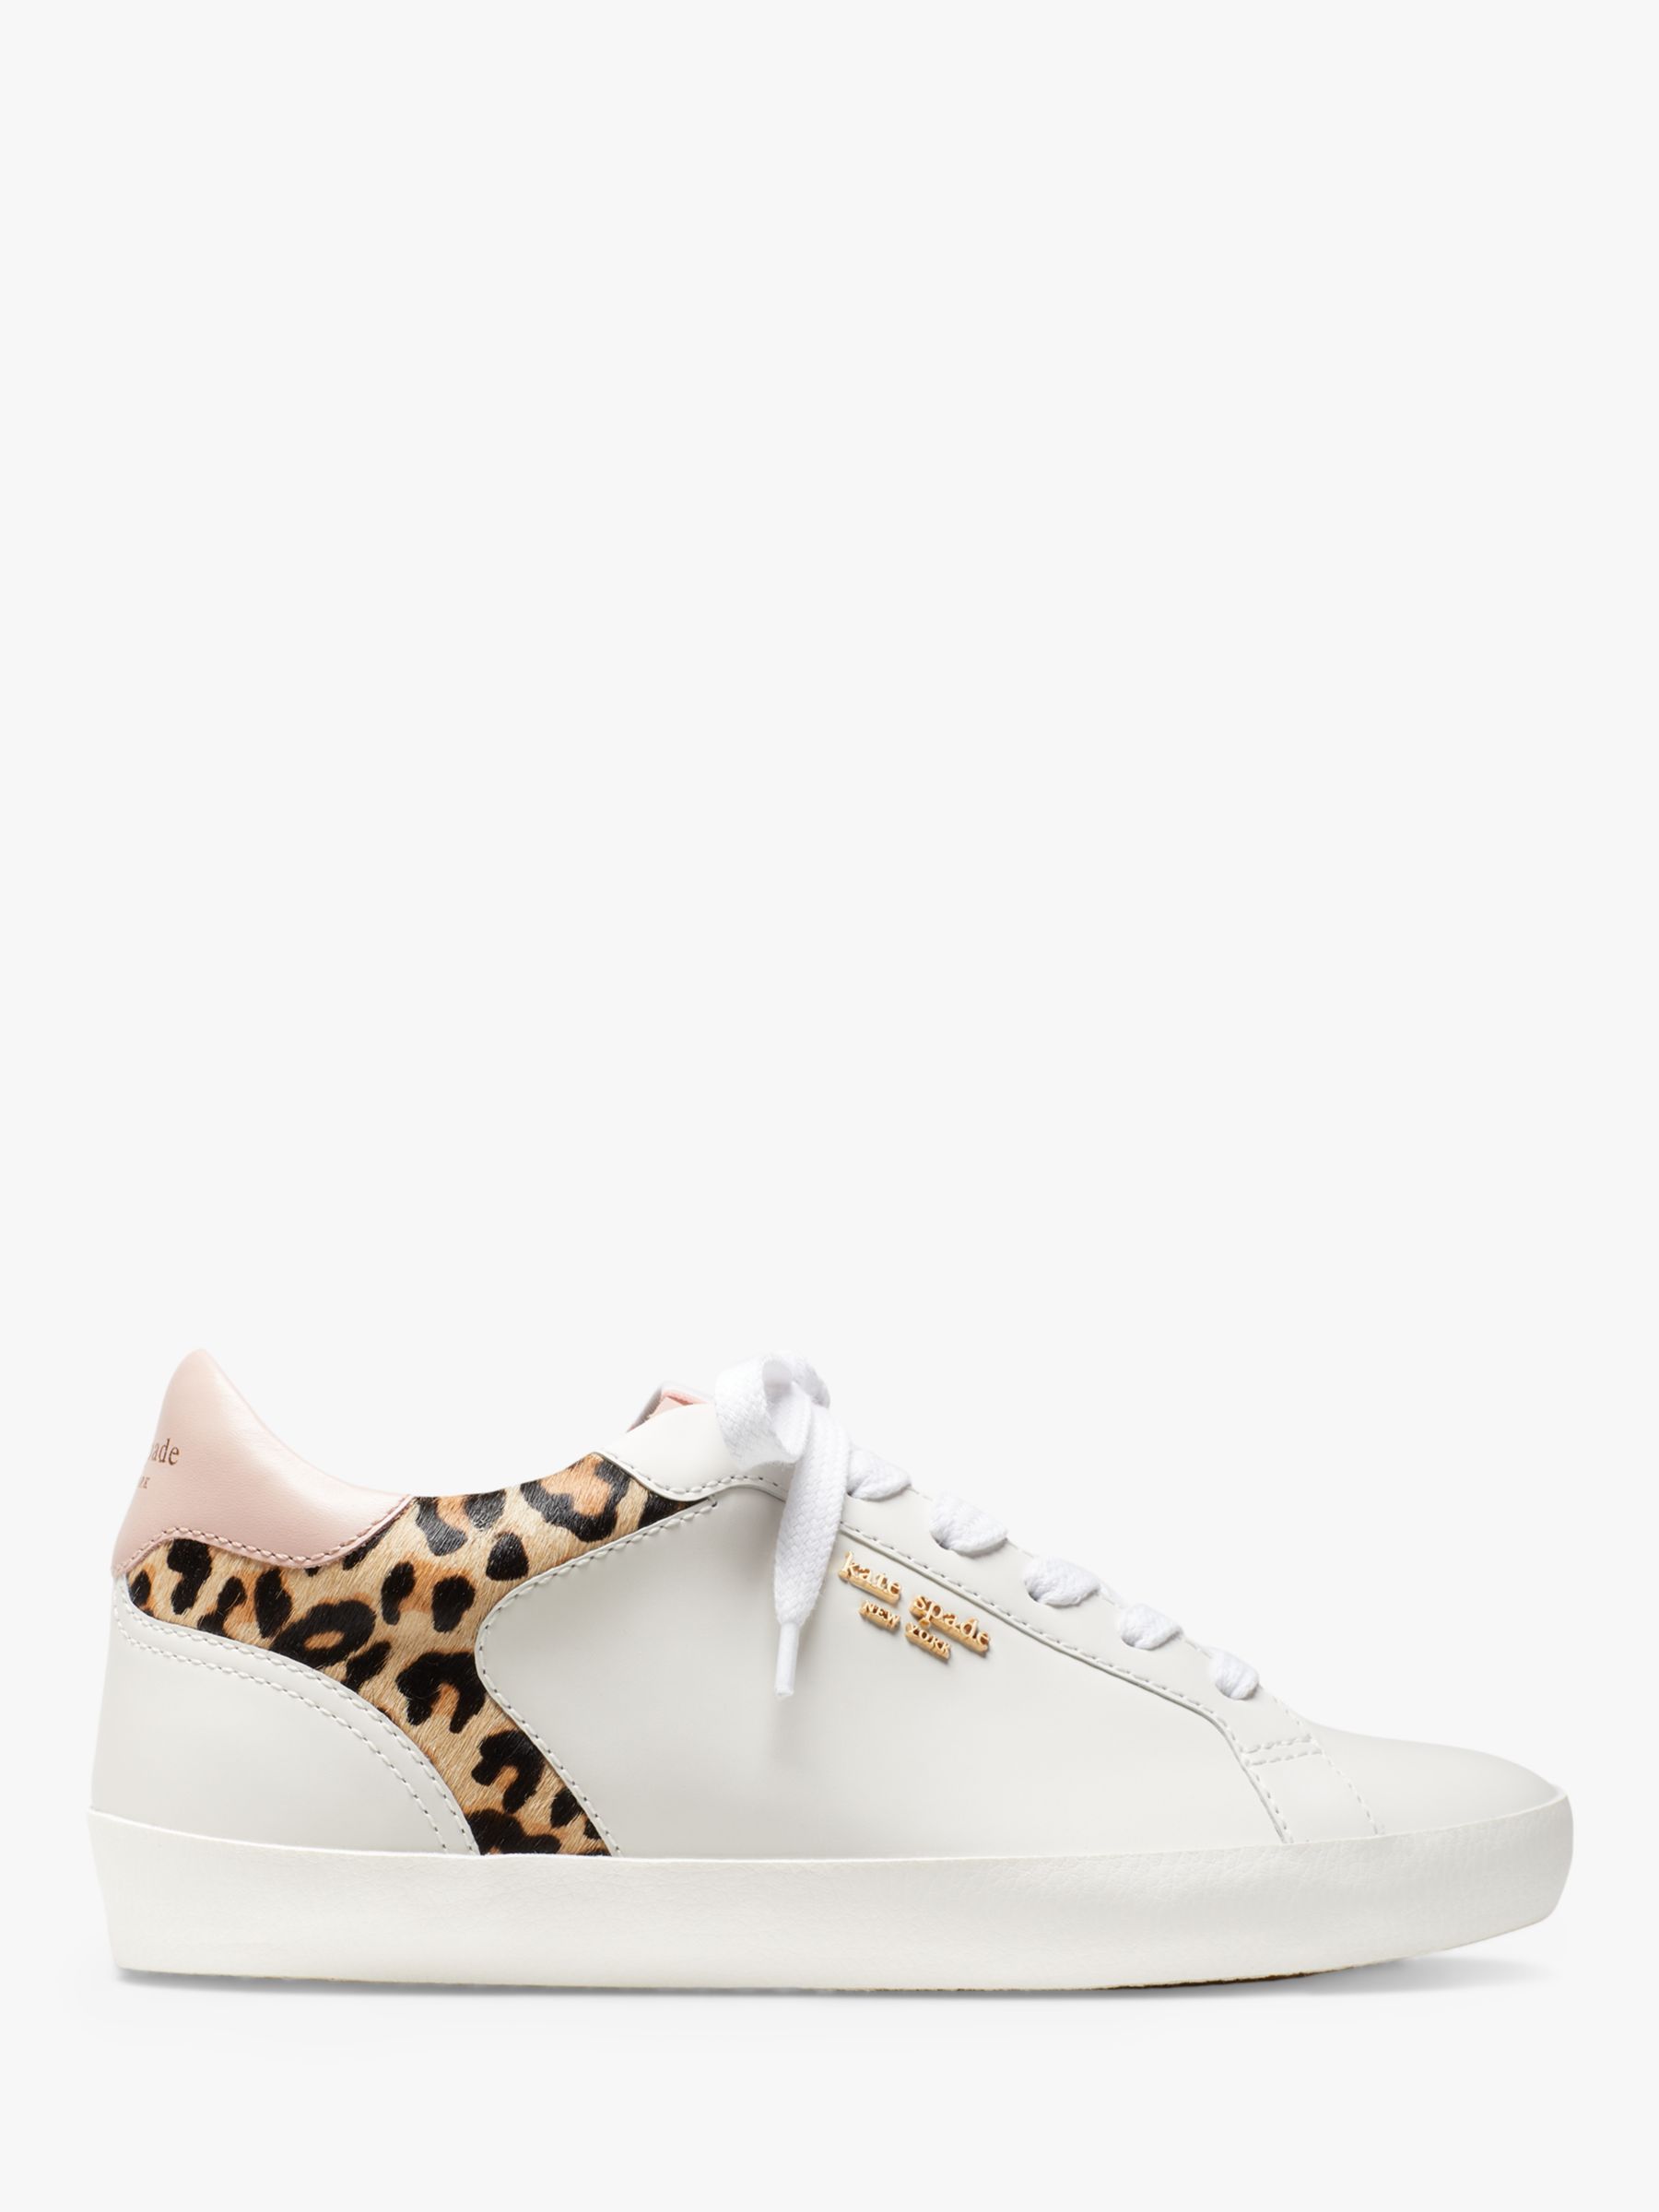 kate spade new york Ace Love Leather Lace Up Trainers, White/Leopard